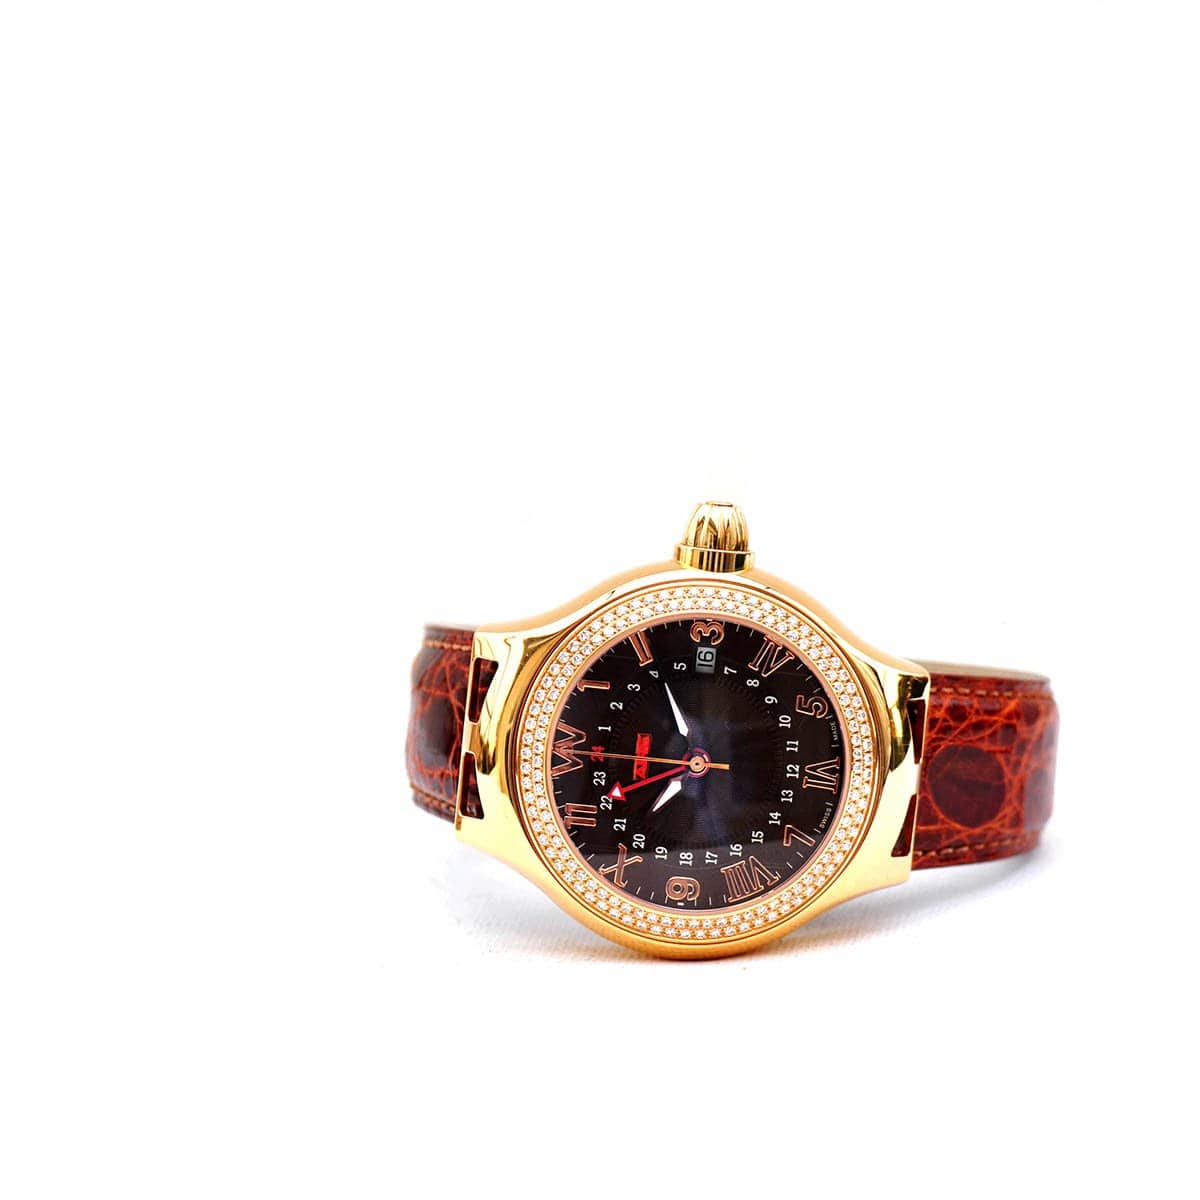 CHRIS AIRE WATCH  PARLAY GMT - Chris Aire Fine Jewelry & Timepieces